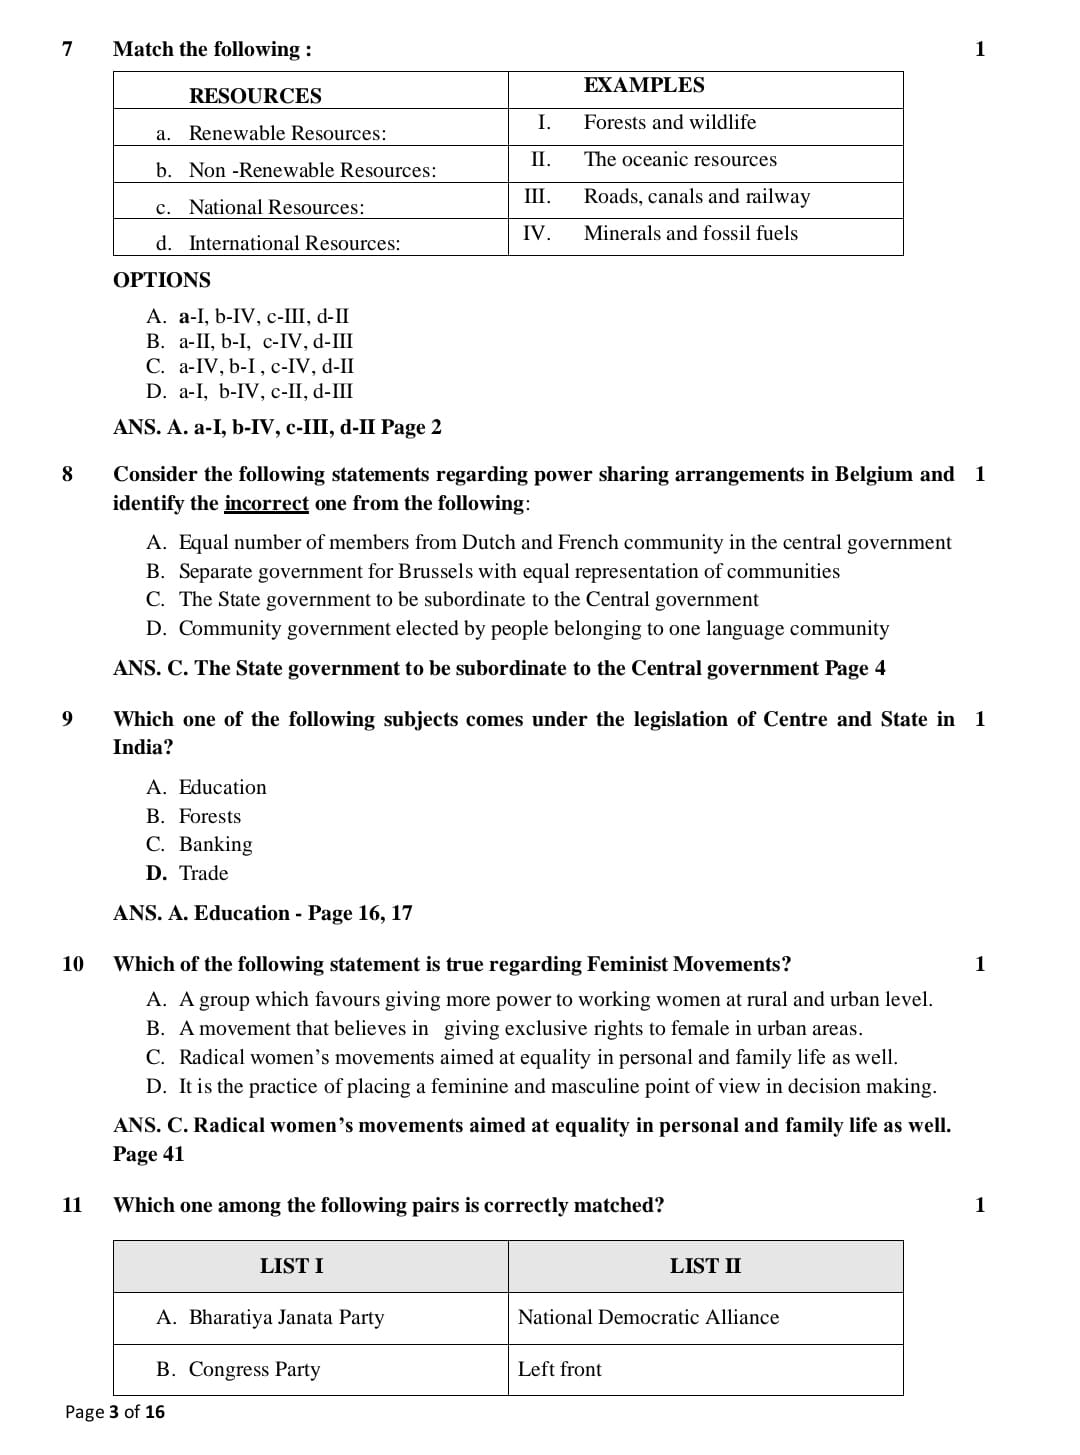 cbse class 10 social science official sample question paper3